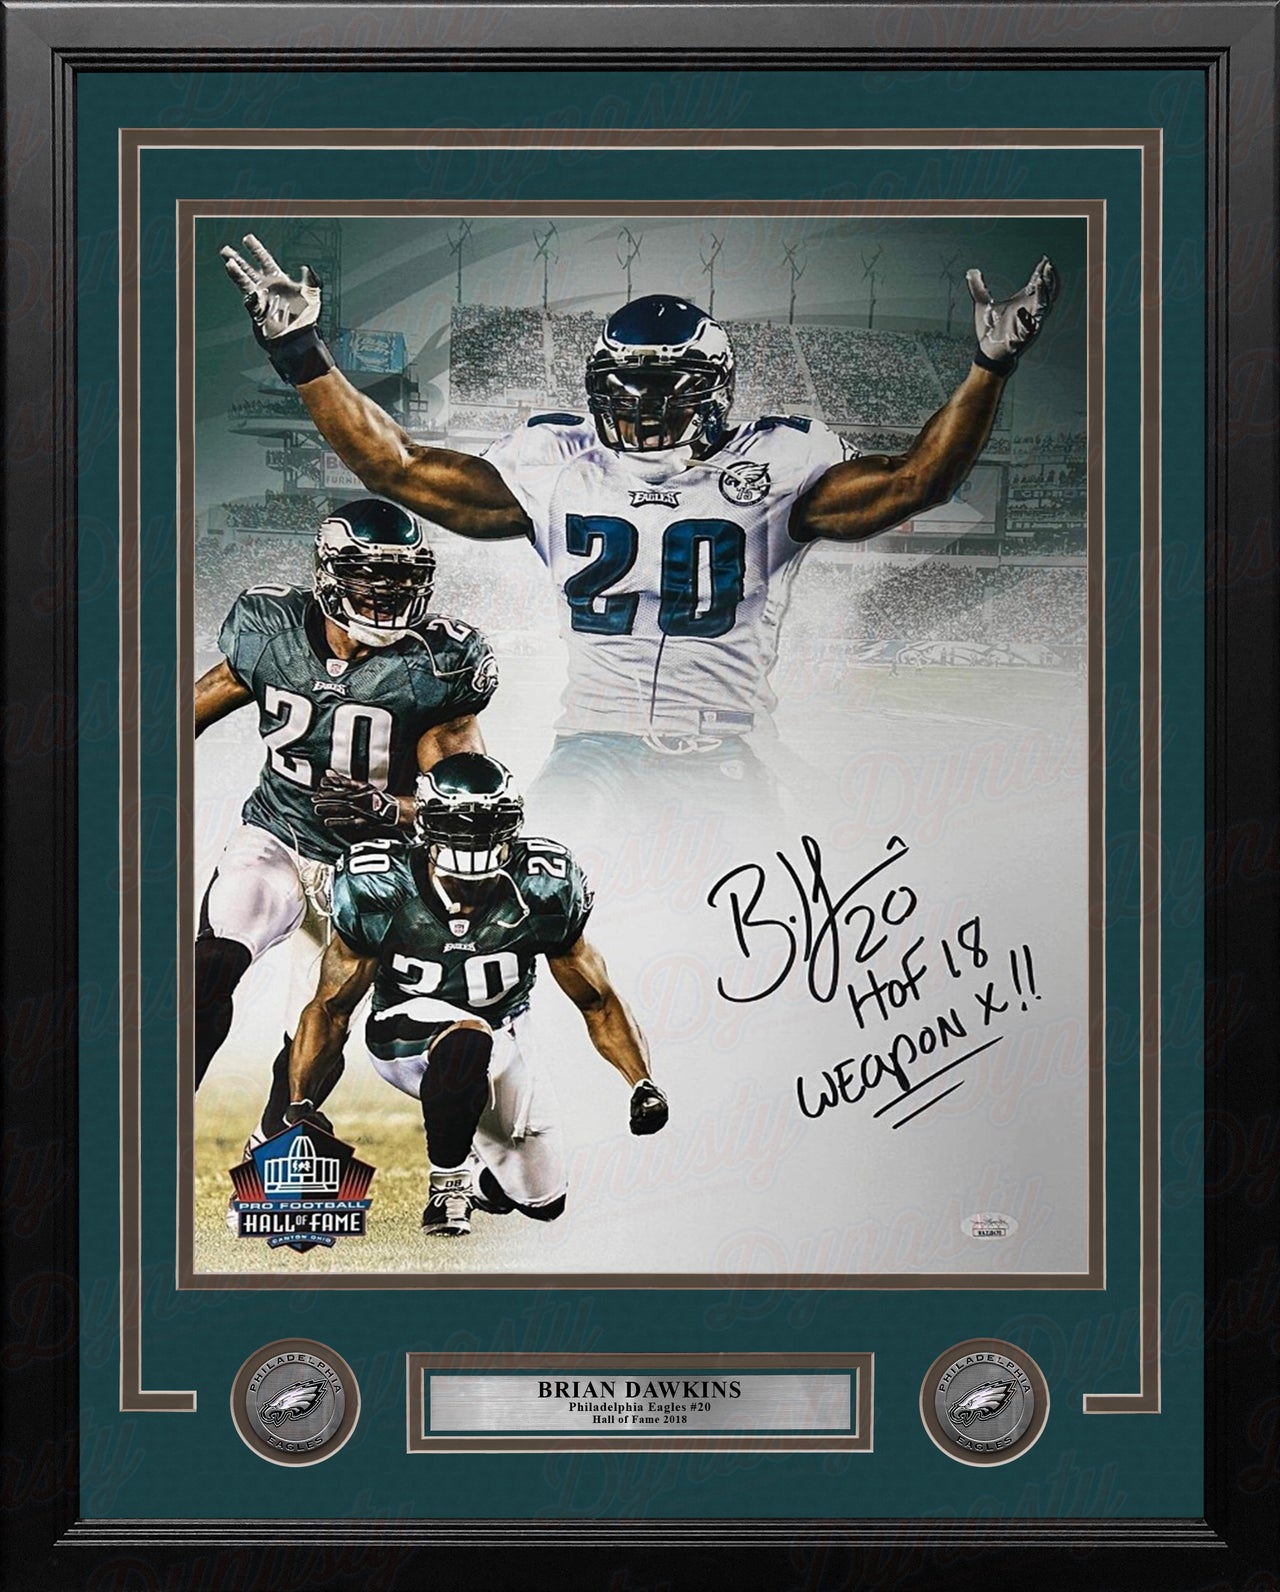 Brian Dawkins Philadelphia Eagles Autographed 16x20 Framed Collage Photo - Hall of Fame, Weapon X